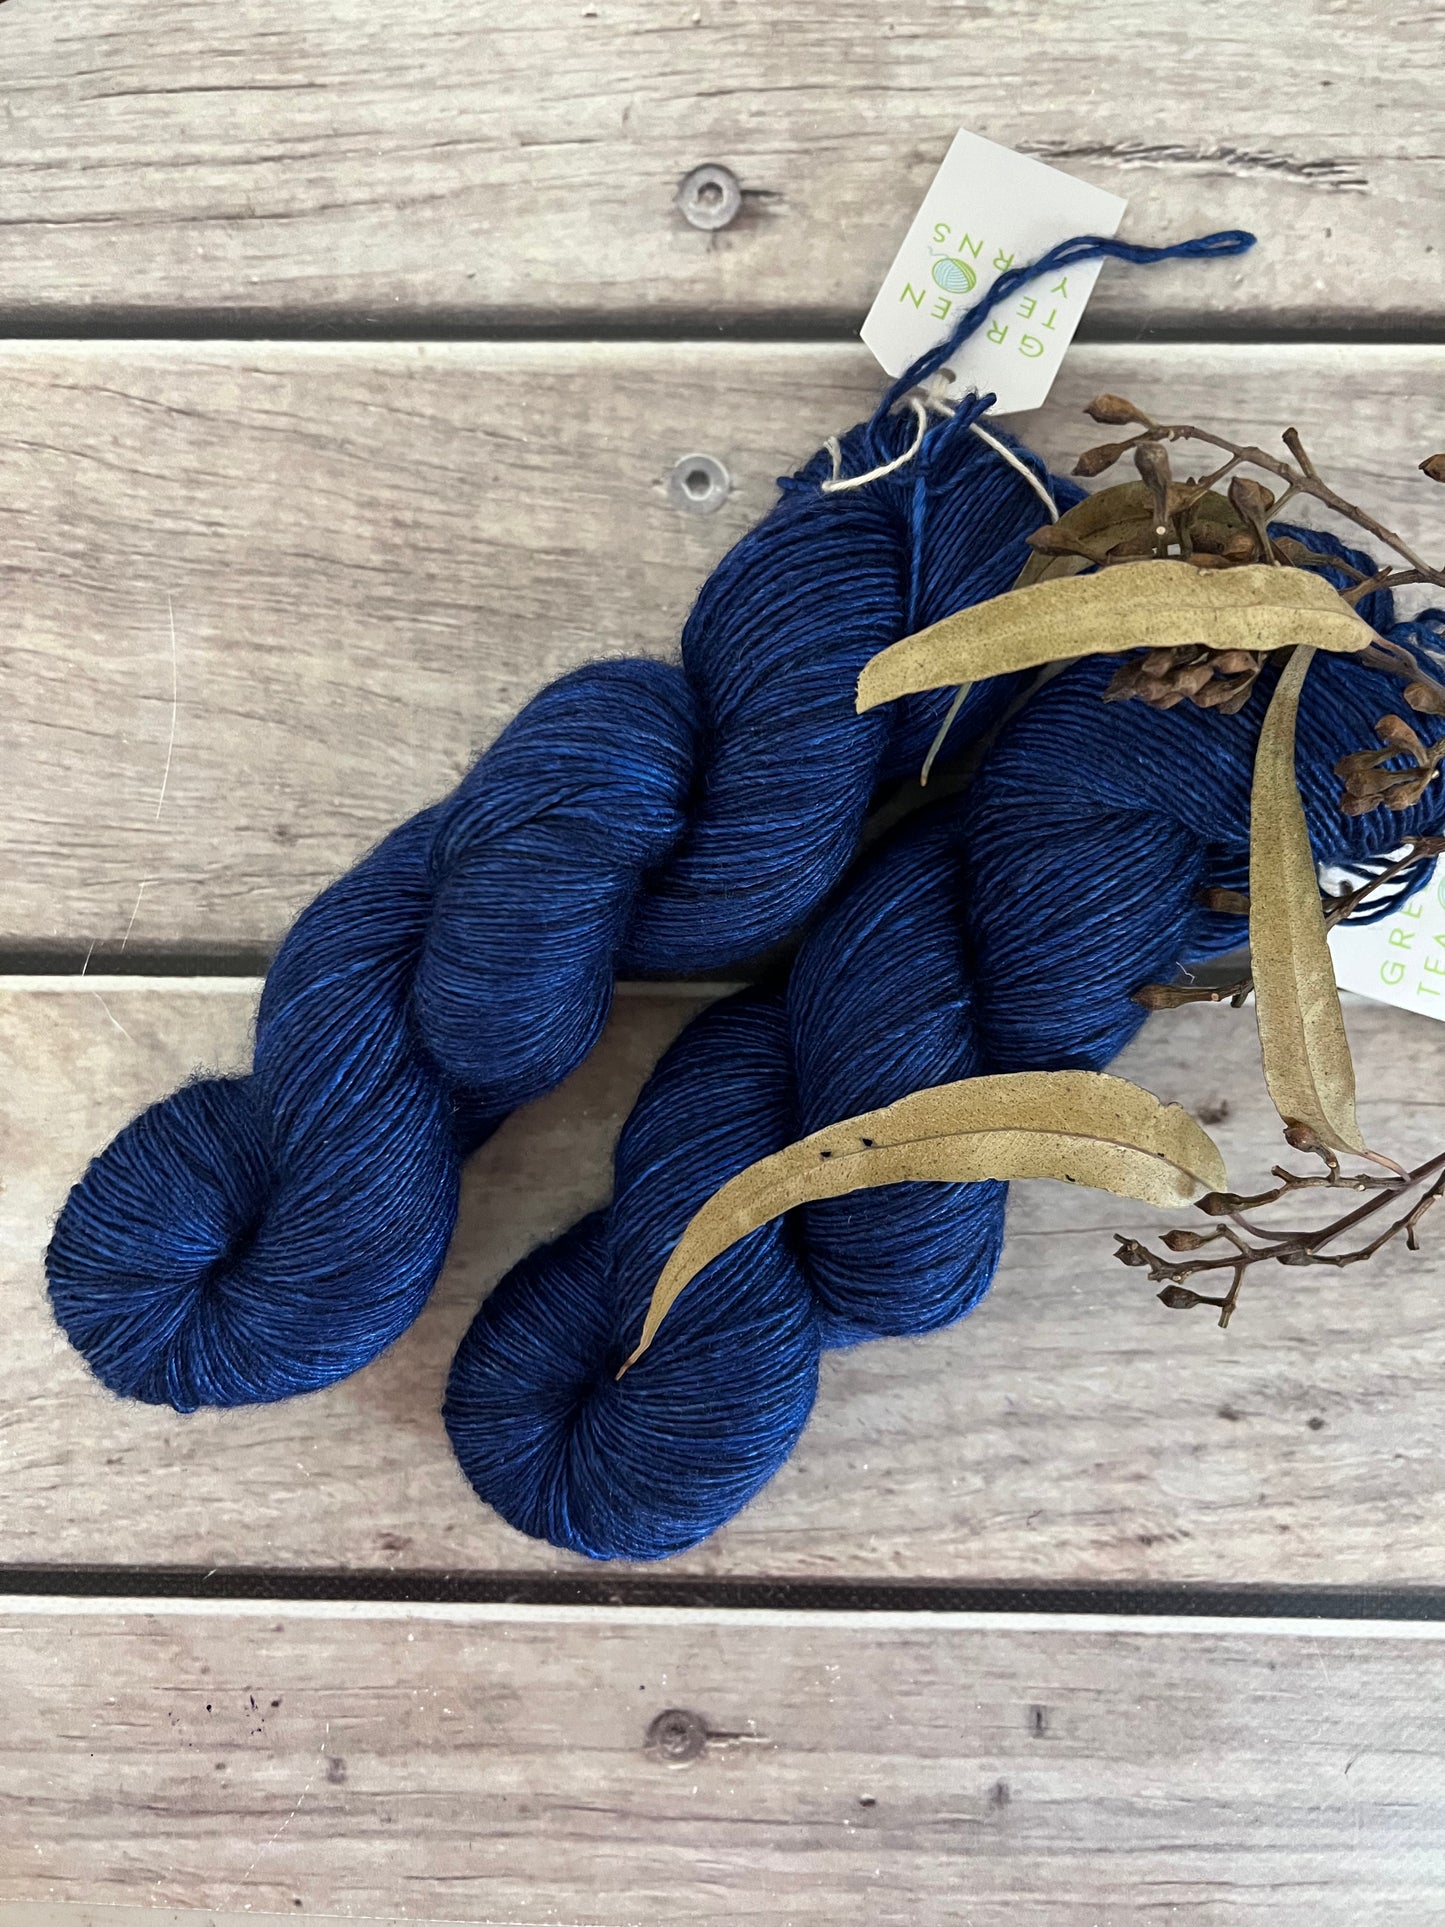 April colour of the Month - Dyed to order - April's Blue